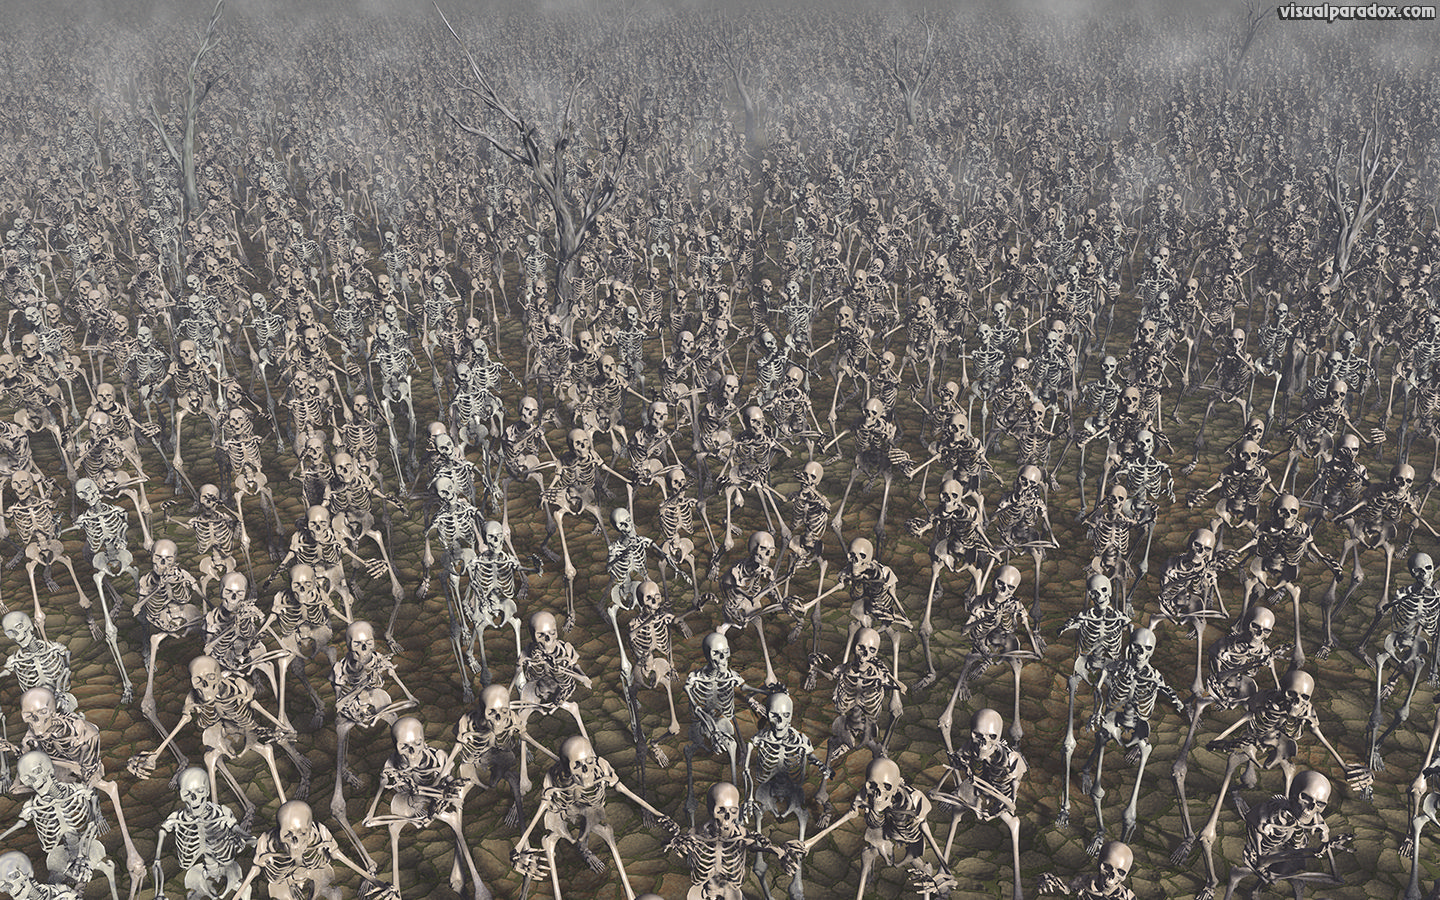 Skeletons, march, zombie, bones, skull, army, marching, crowd, chase, zombies, skeleton, attack, 3d, wallpaper